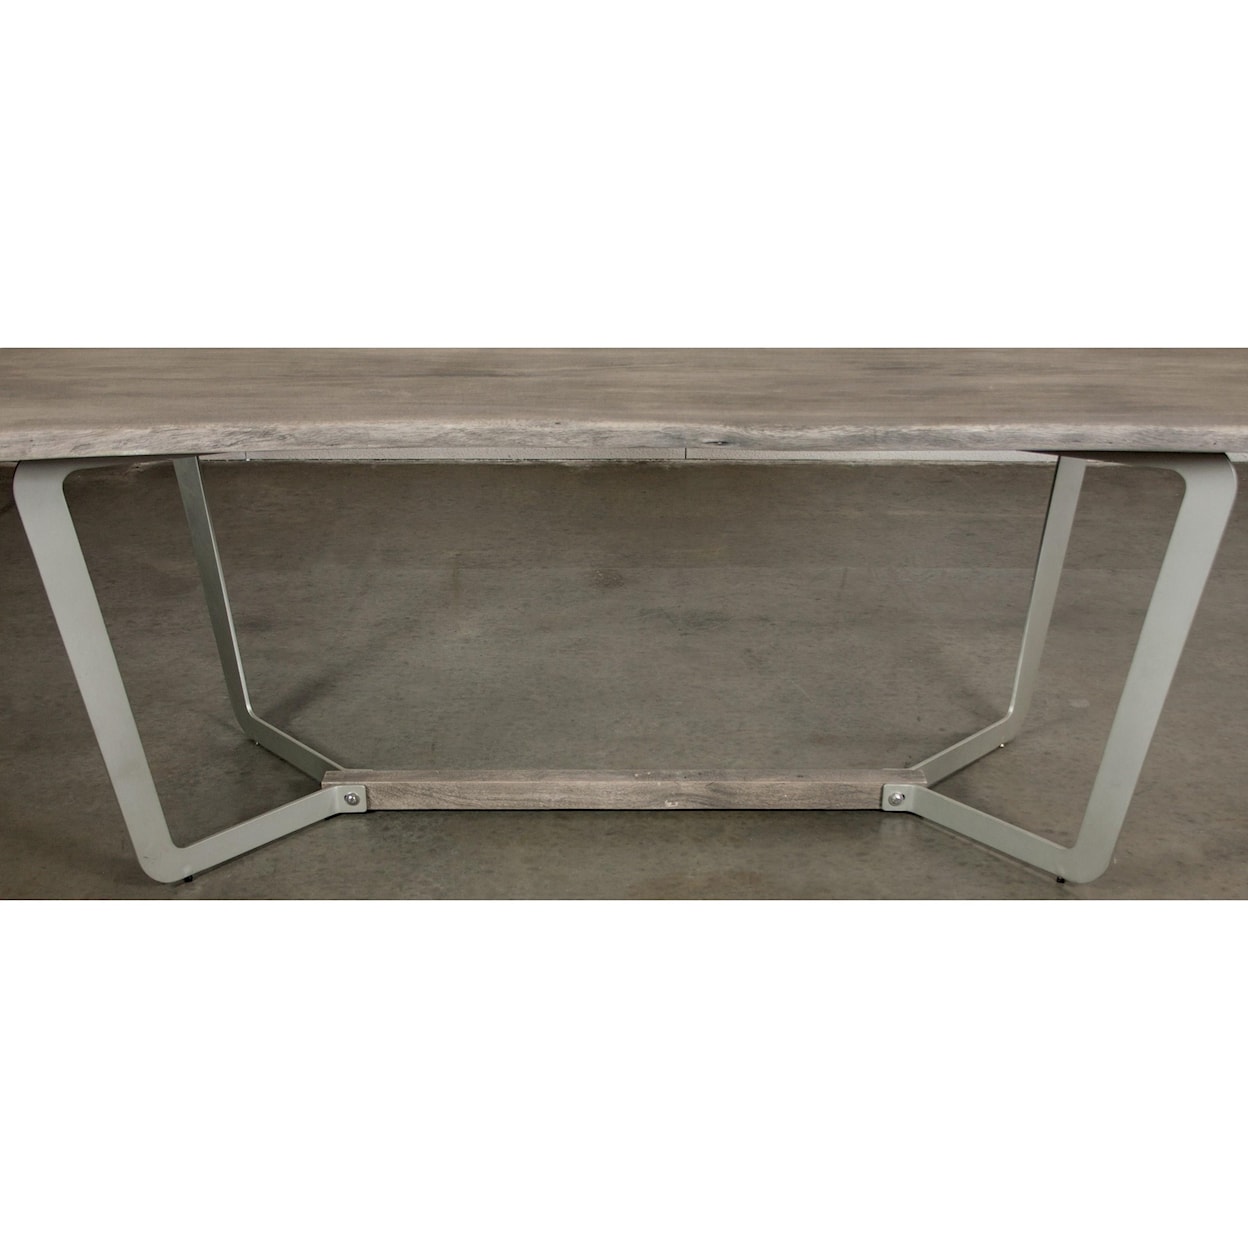 Riverside Furniture Waverly Live-Edge Dining Table